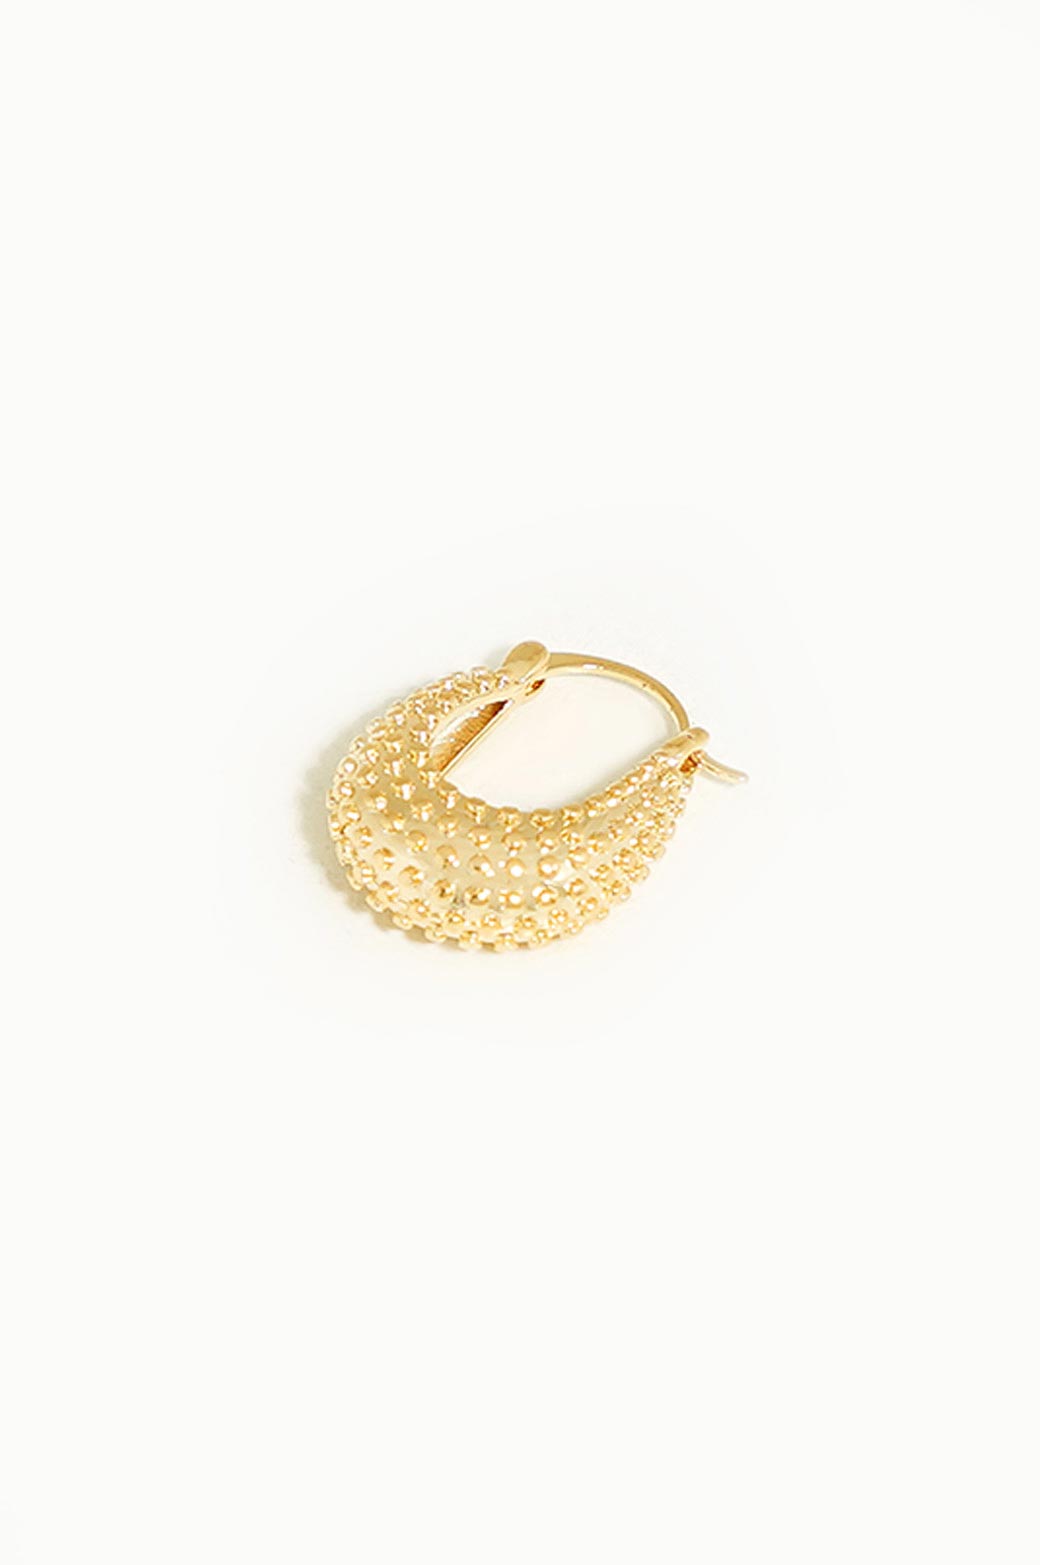 GOLD TEXTURED EARRING